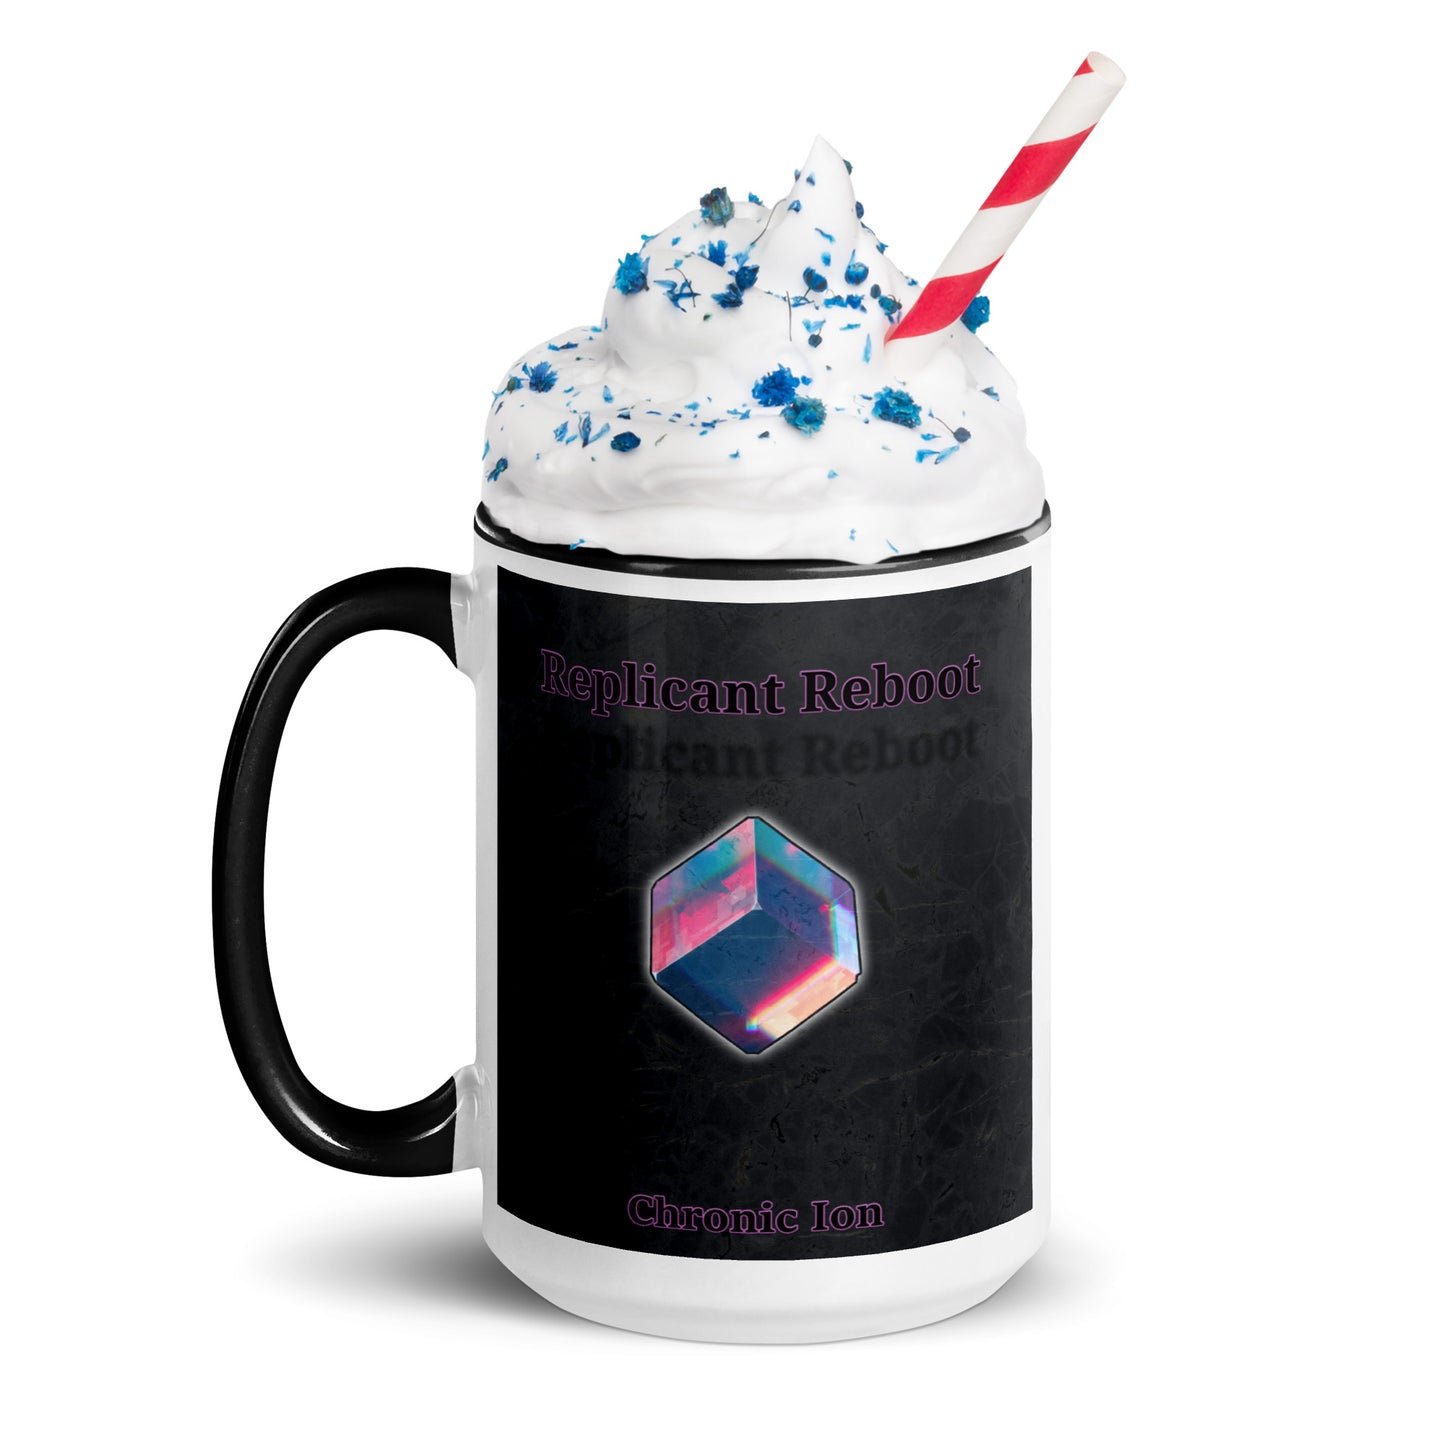 Chronic Ion - Replicant Reboot Mug With Color Inside